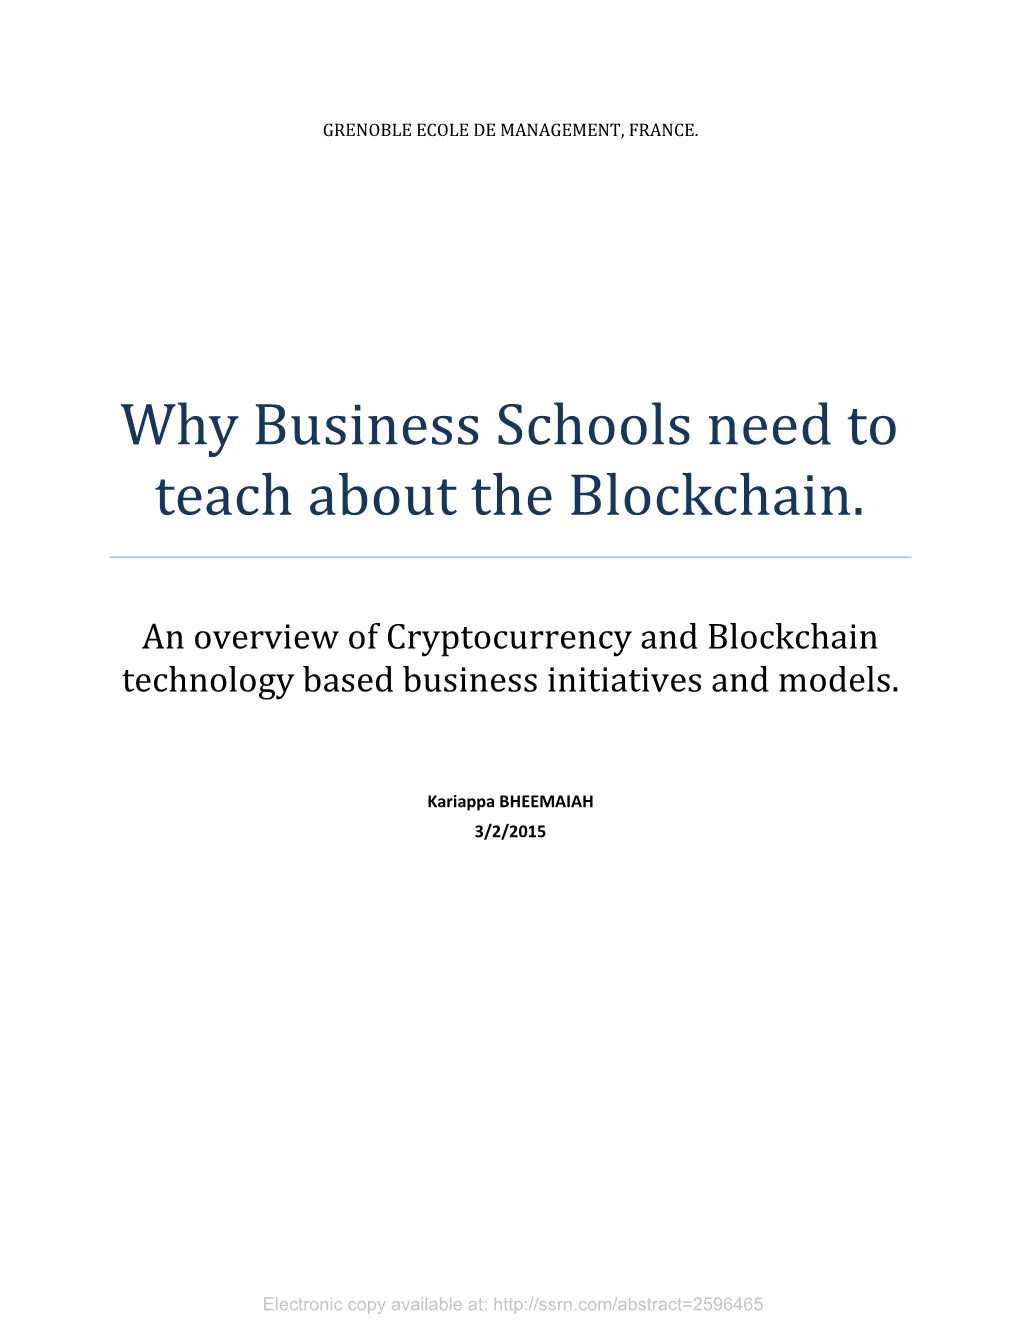 Why Business Schools Need to Teach Blockchain